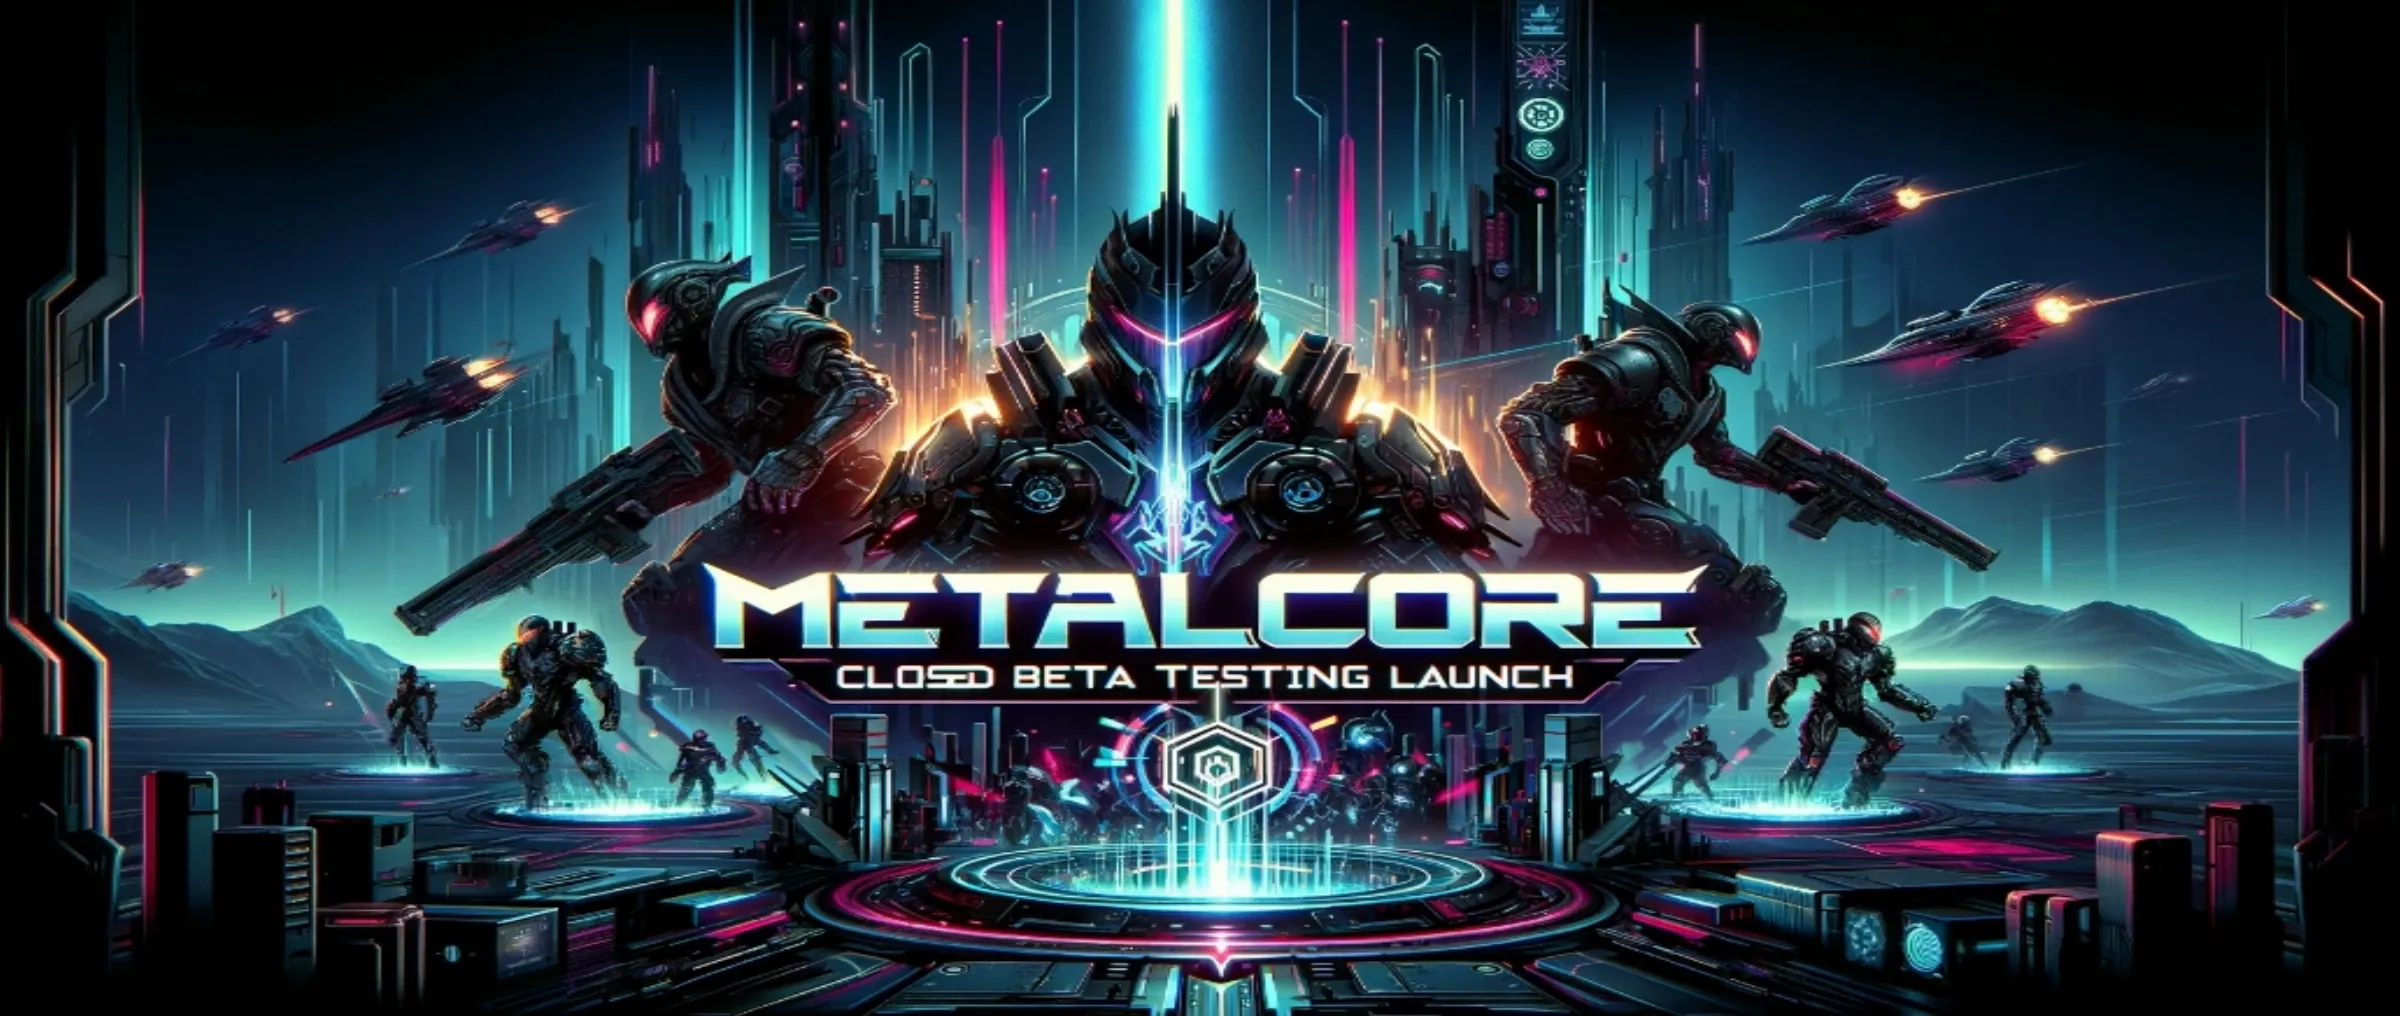 MetalCore announces the launch of closed beta testing